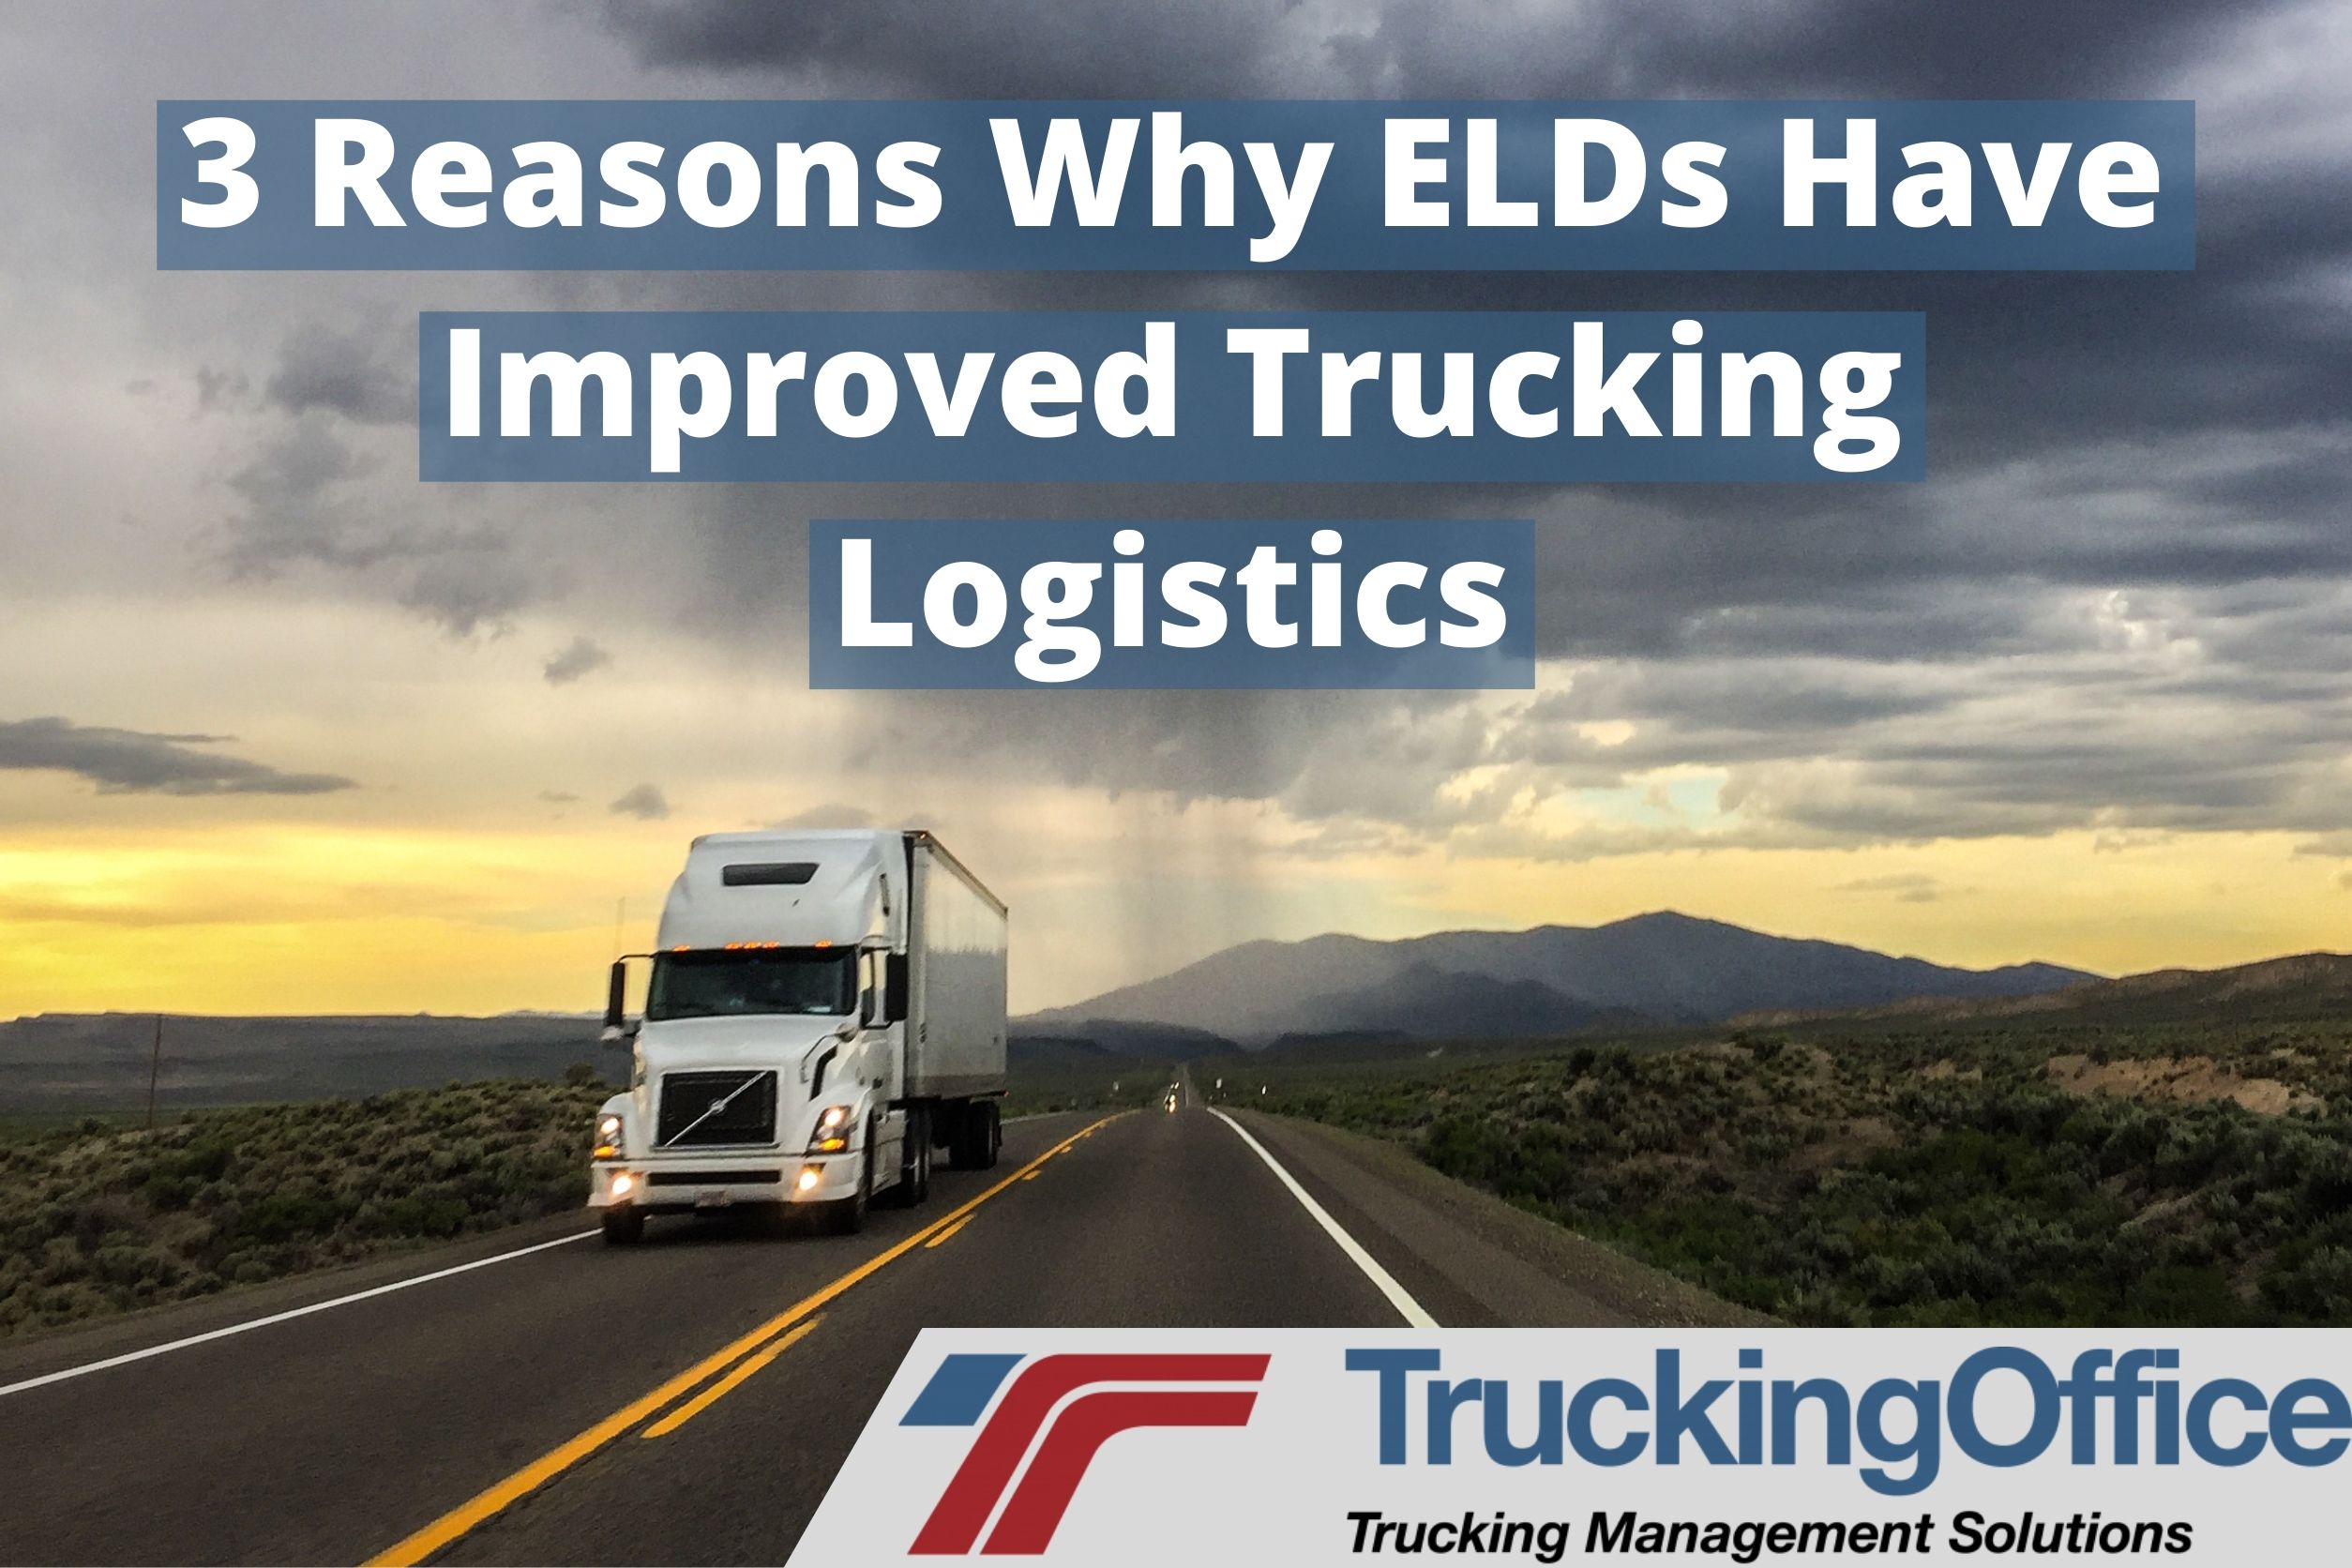 3 Reasons Why ELDs Have Improved Trucking Logistics